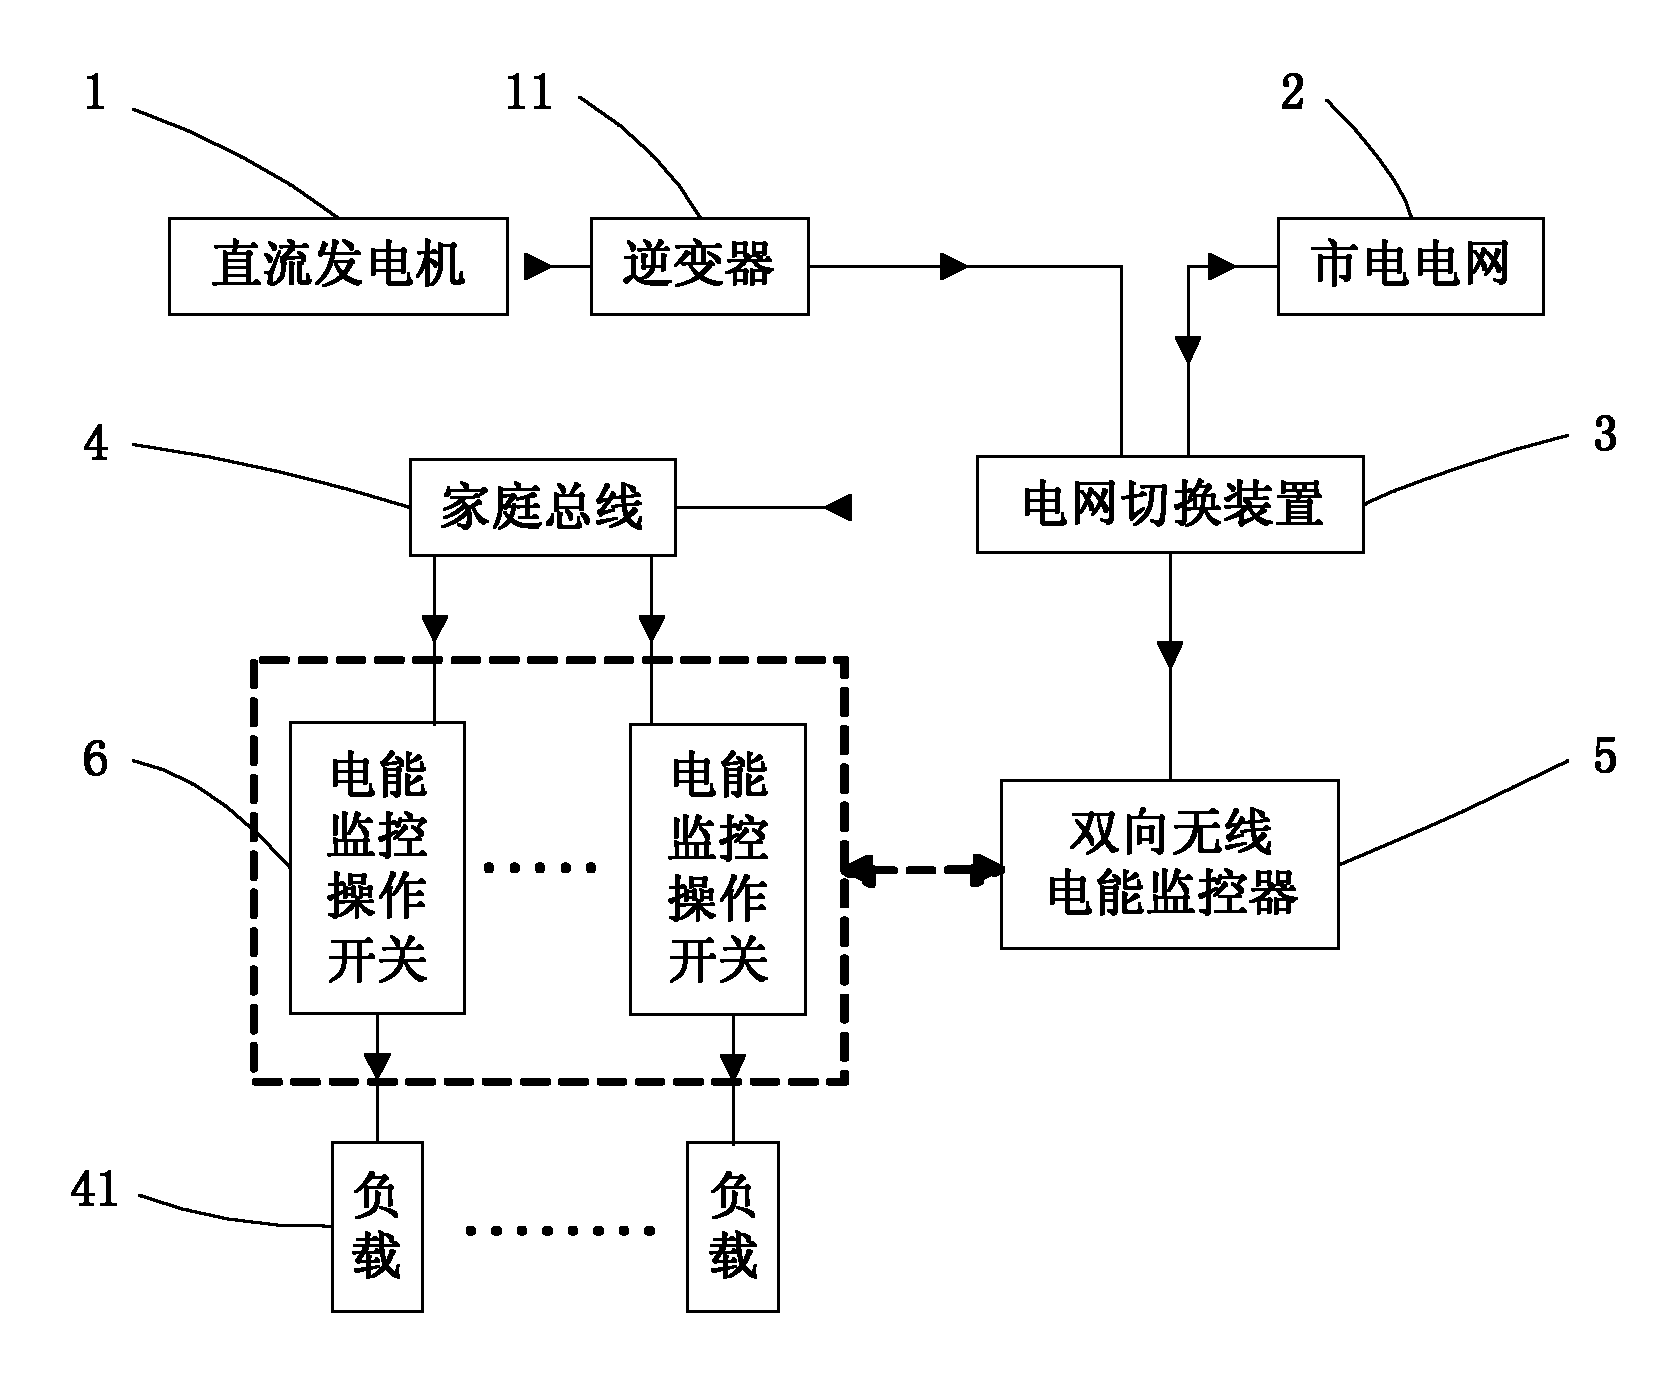 System for complementary power supply between small power station and commercial power grid